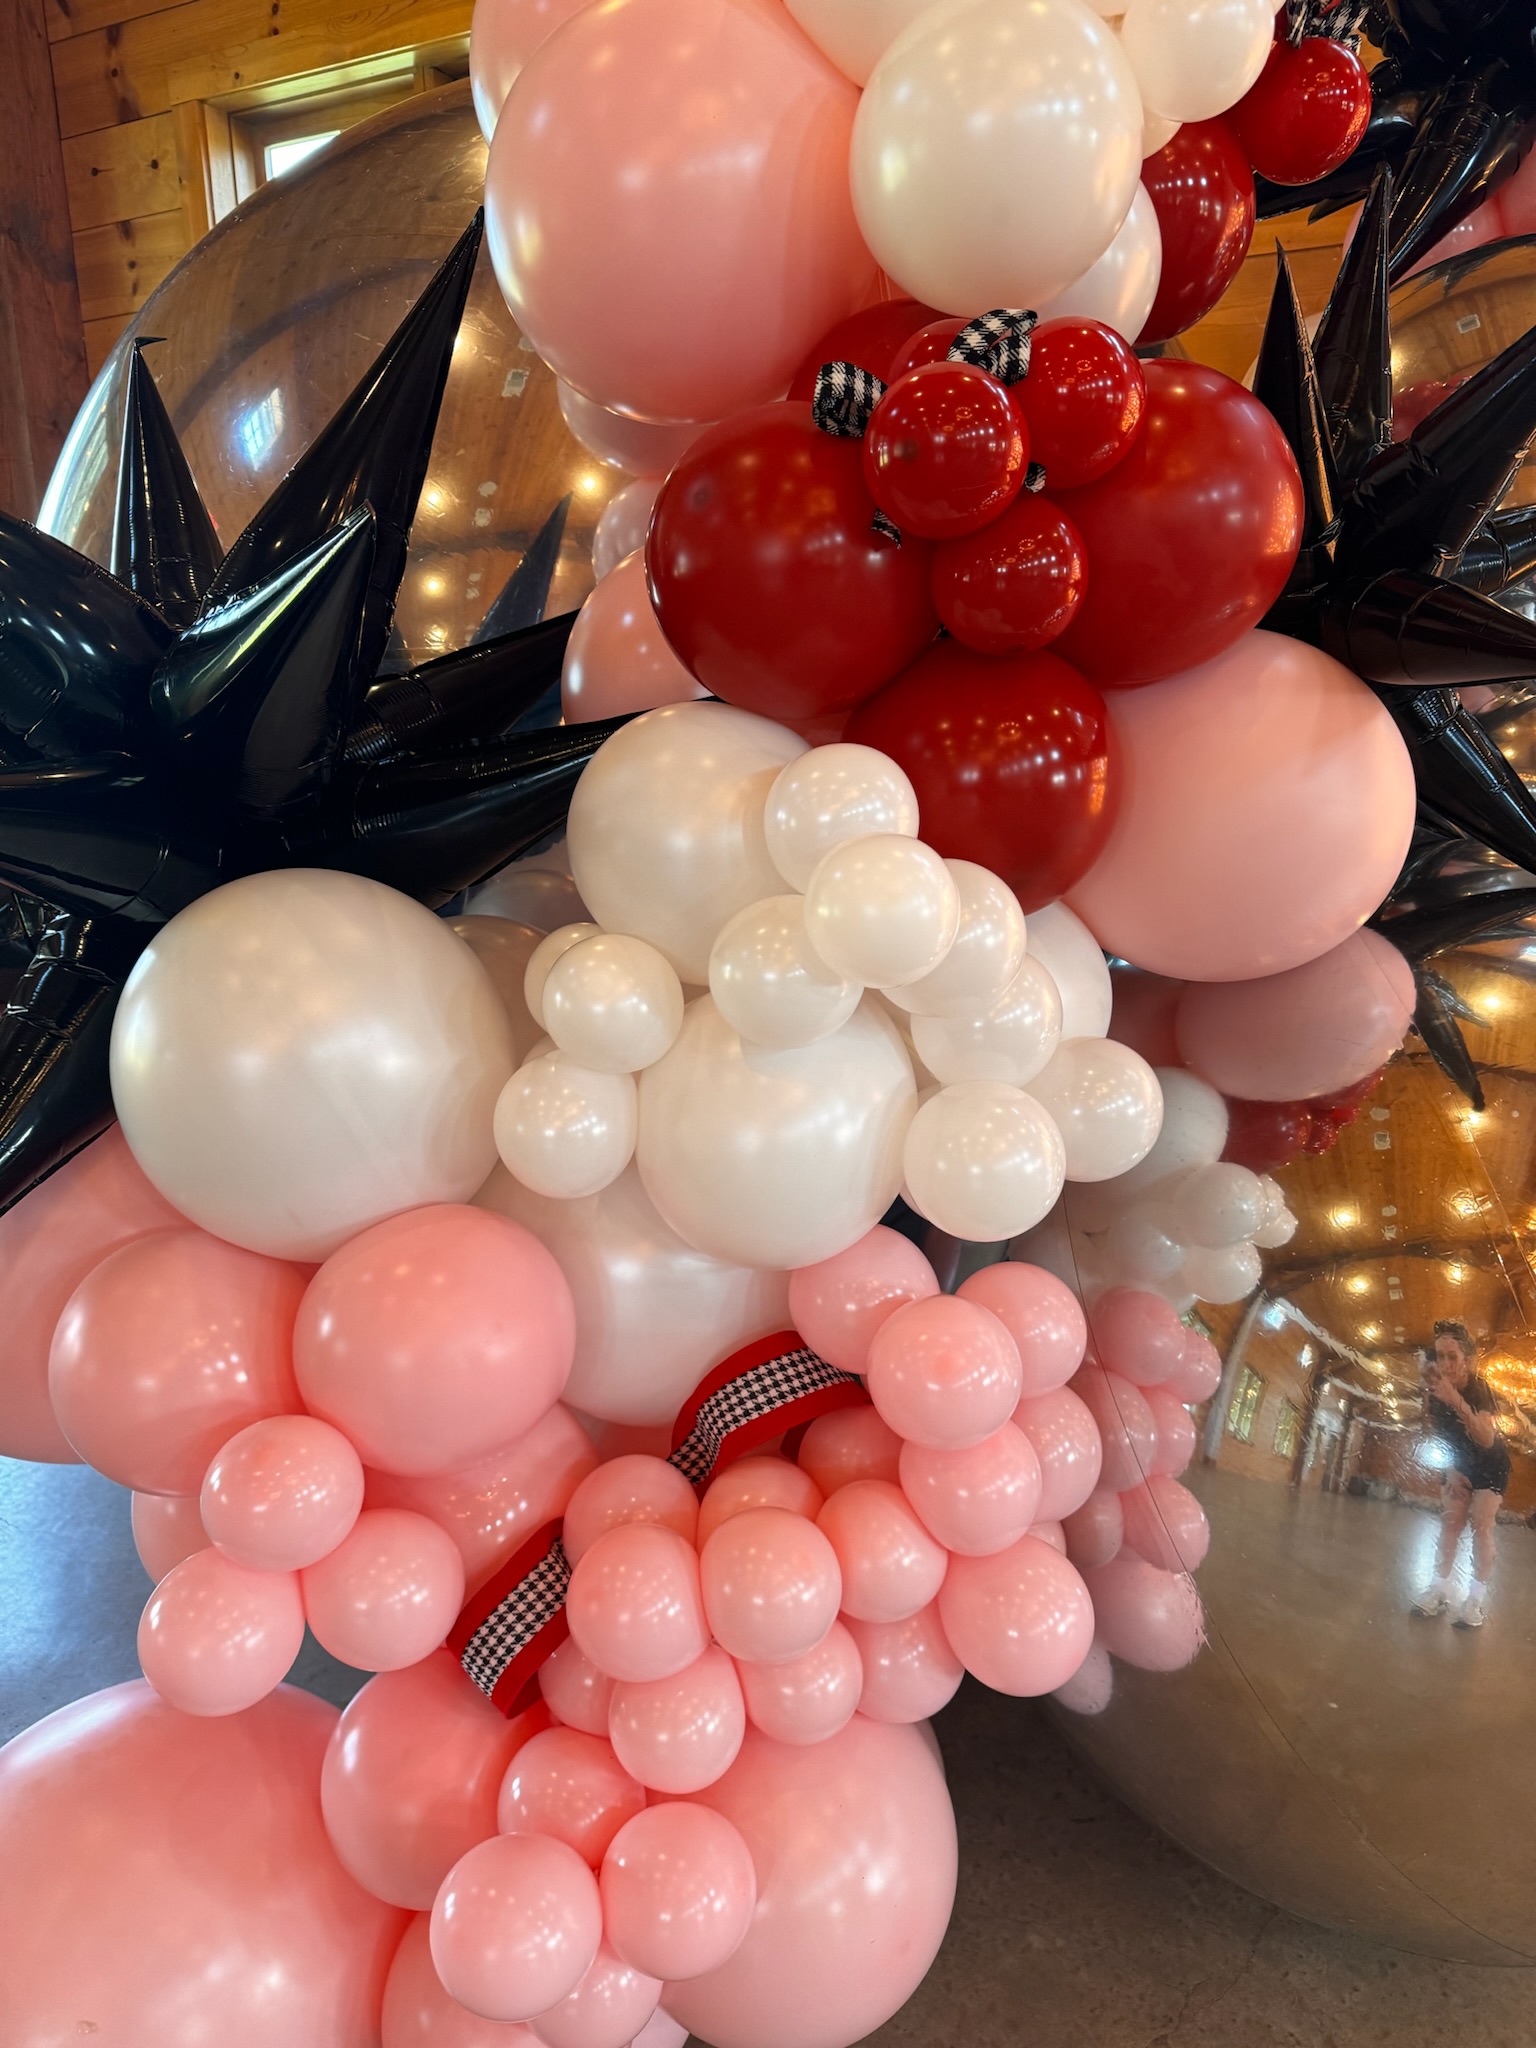 Up close, detailed picture of the balloon arch, showing different ribbons throughout.